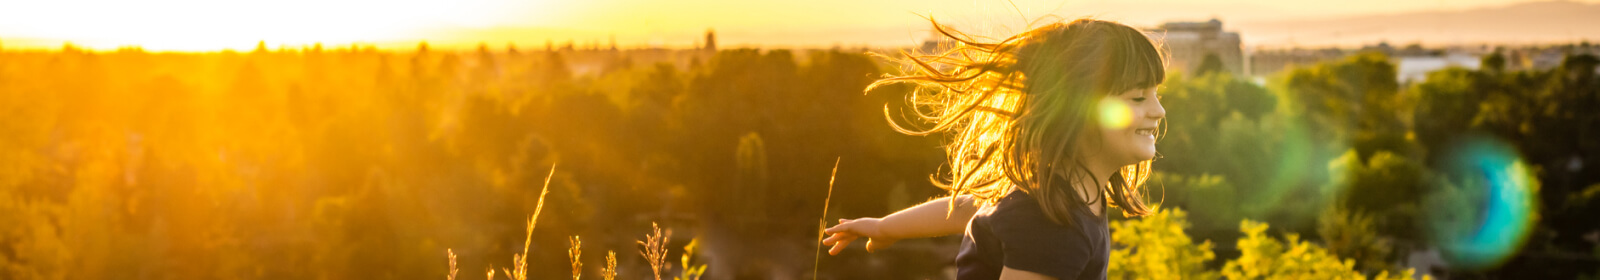 Young girl smiling while playing in a field at golden hour